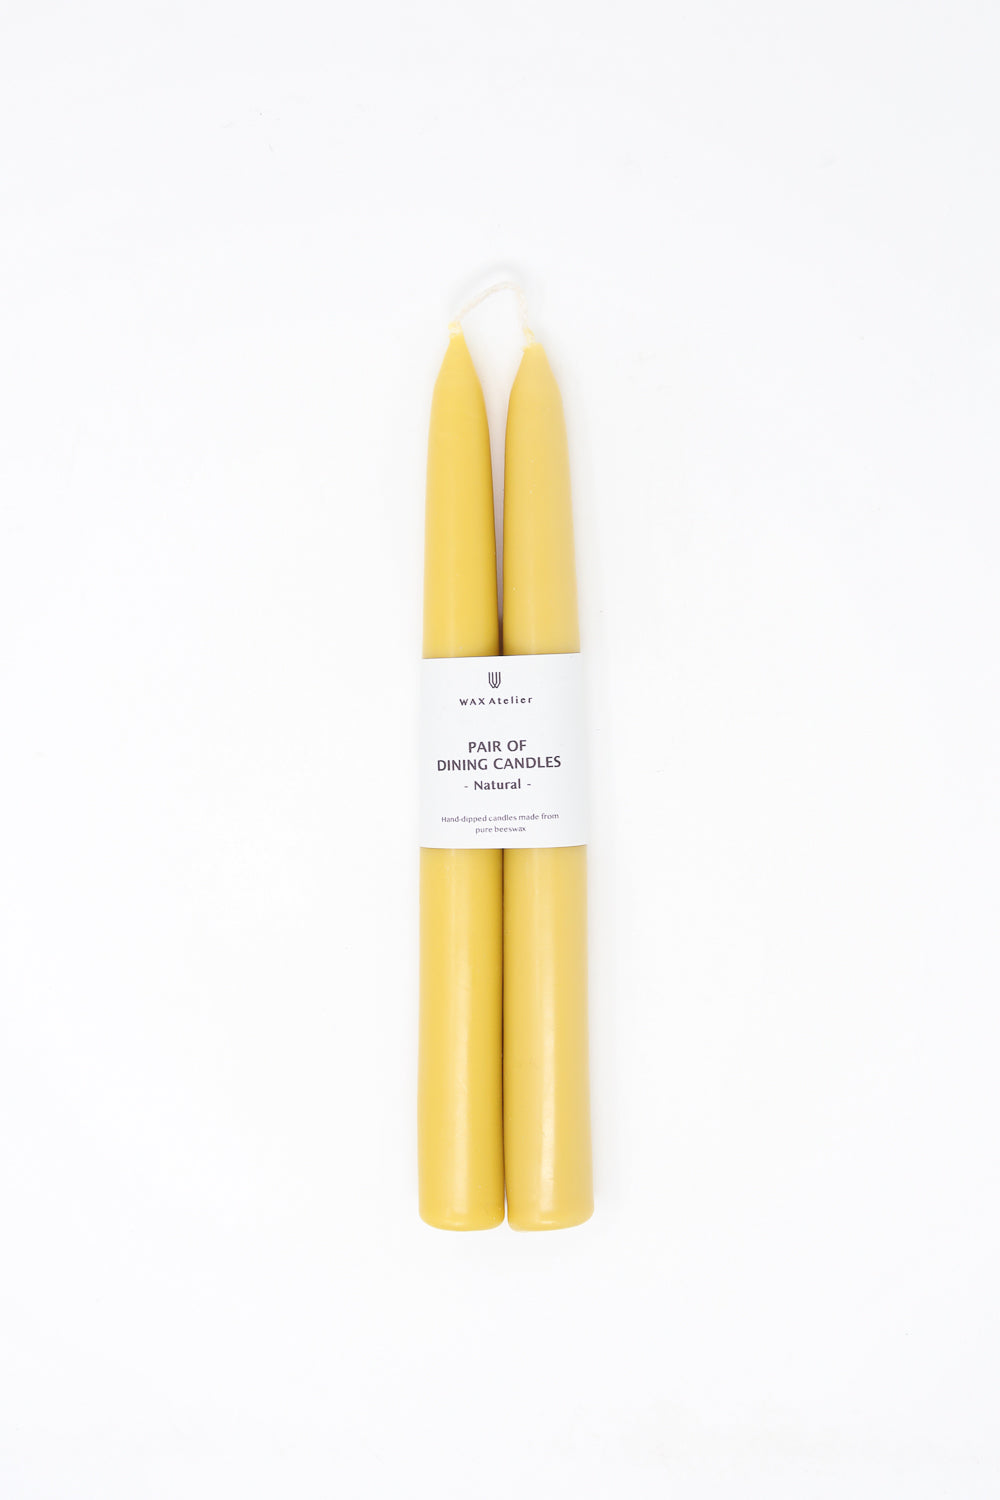 Wax Atelier Beeswax Dining Candles in Natural